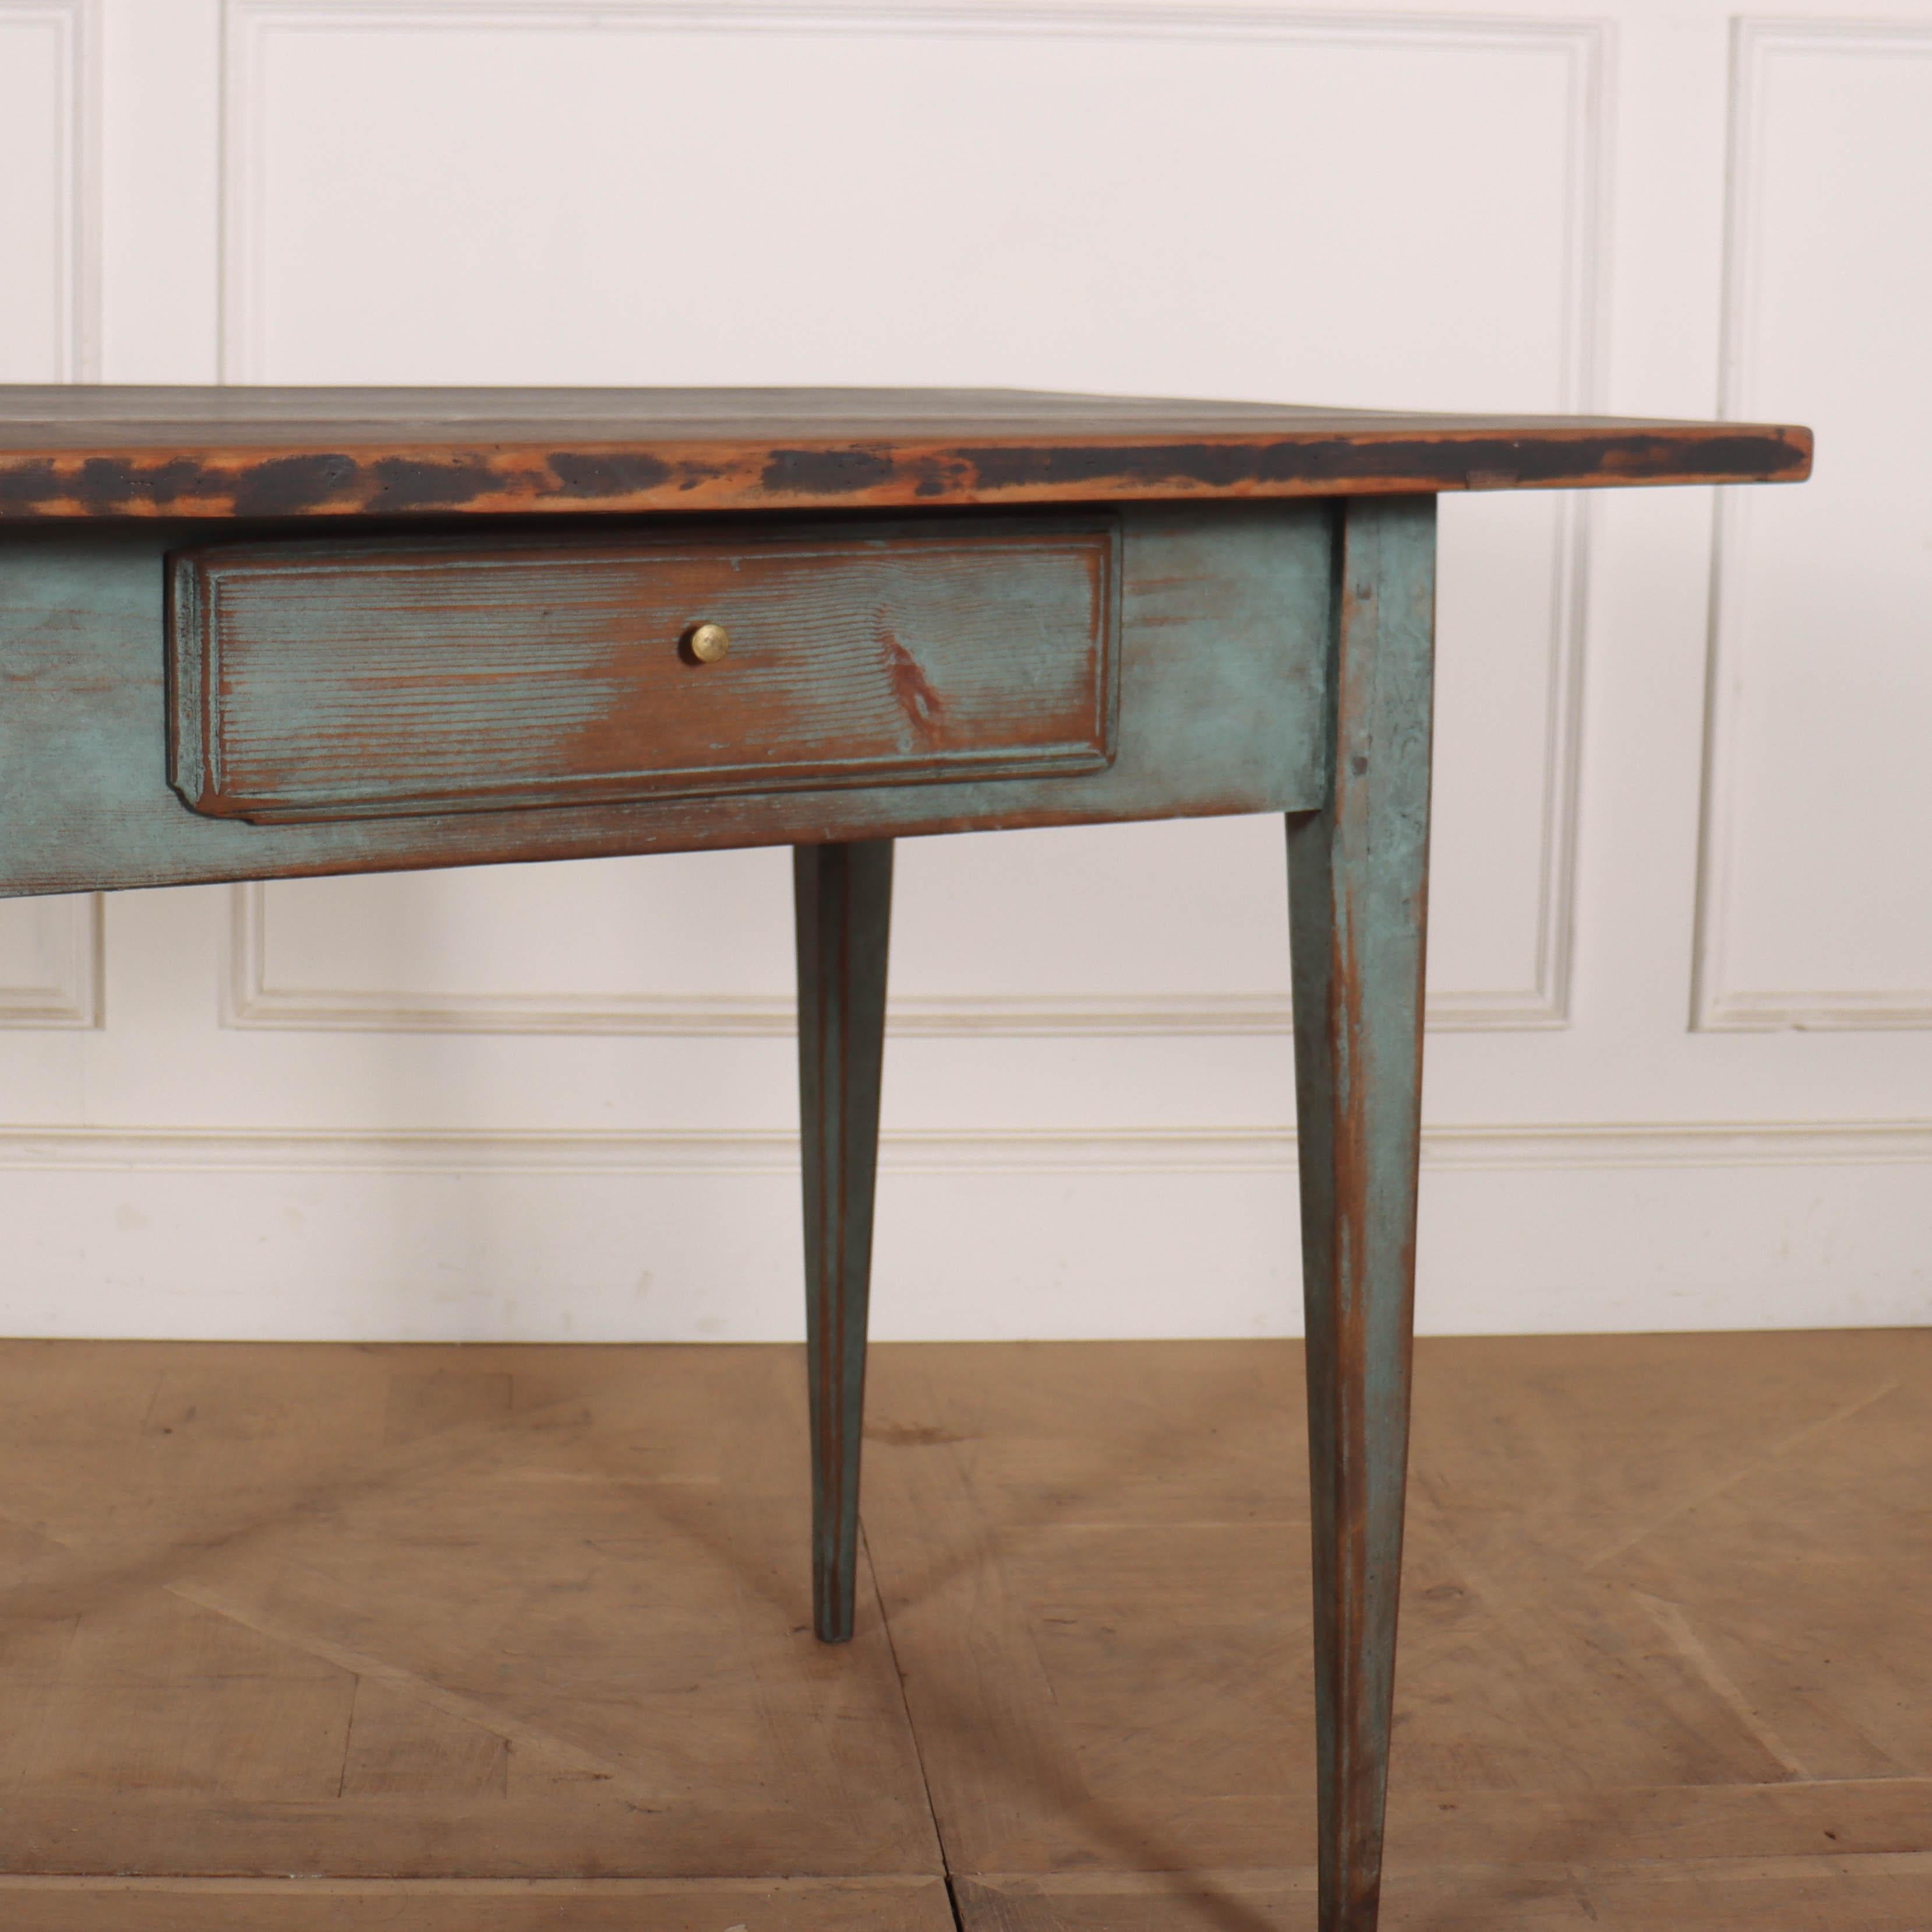 Early 19th century Swedish painted pine one drawer lamp table. 1830.

Ref: C.

Dimensions
41 inches (104 cms) Wide
27.5 inches (70 cms) Deep
30 inches (76 cms) High.